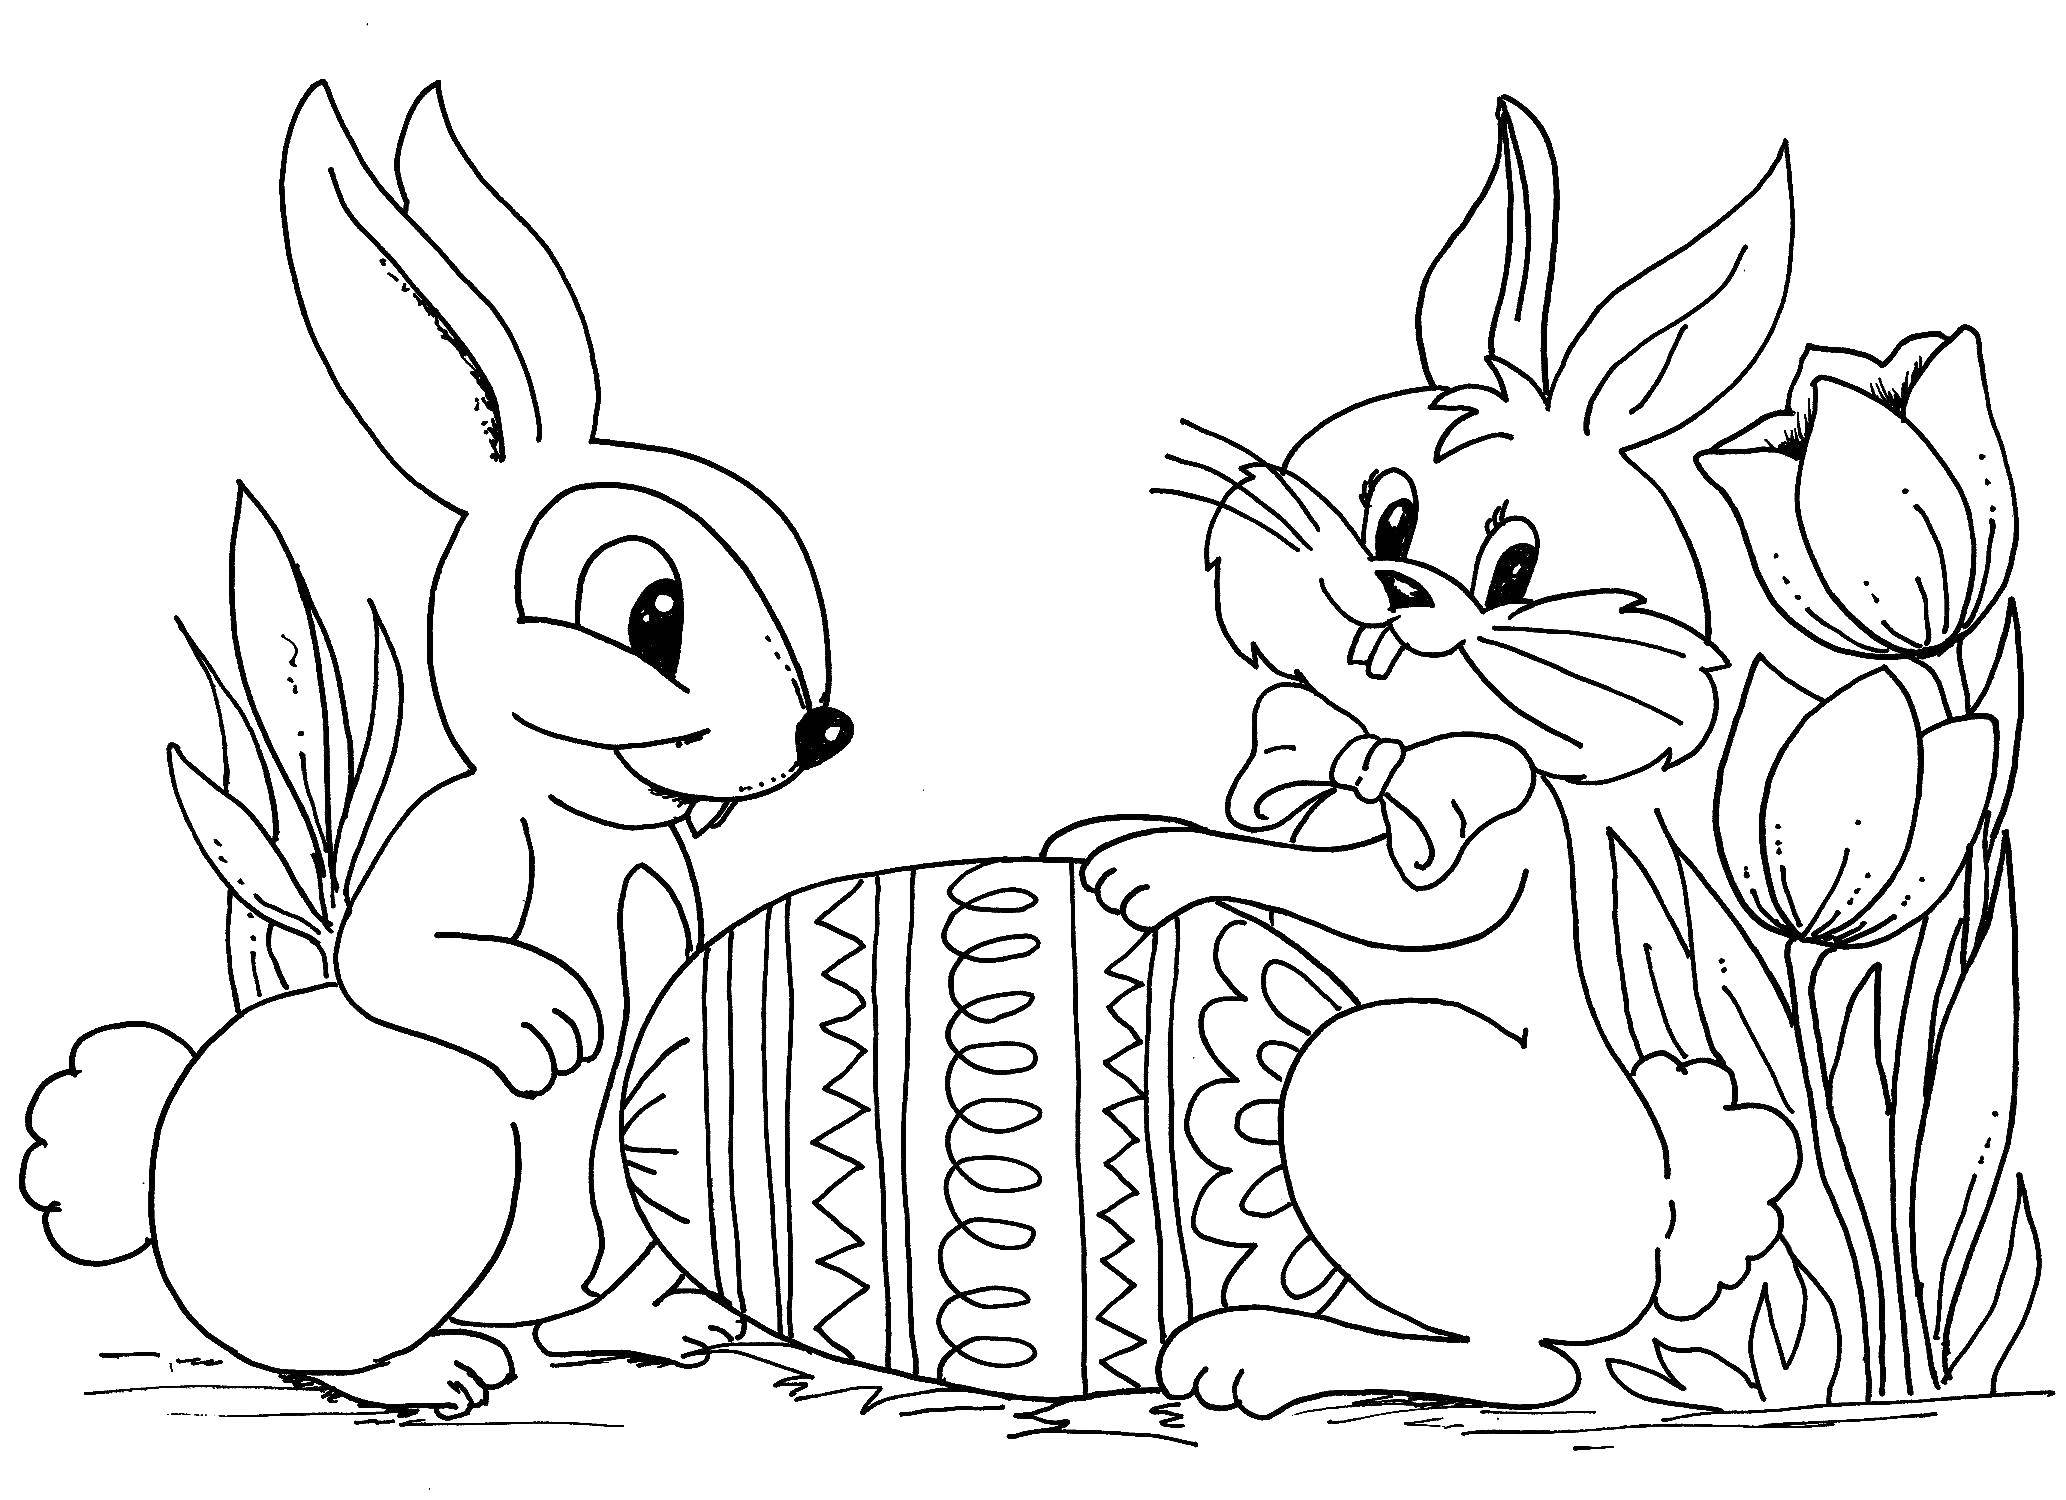 Coloring Rabbit, Bunny and Easter egg. Category the rabbit. Tags:  rabbit, Bunny, egg, Easter.